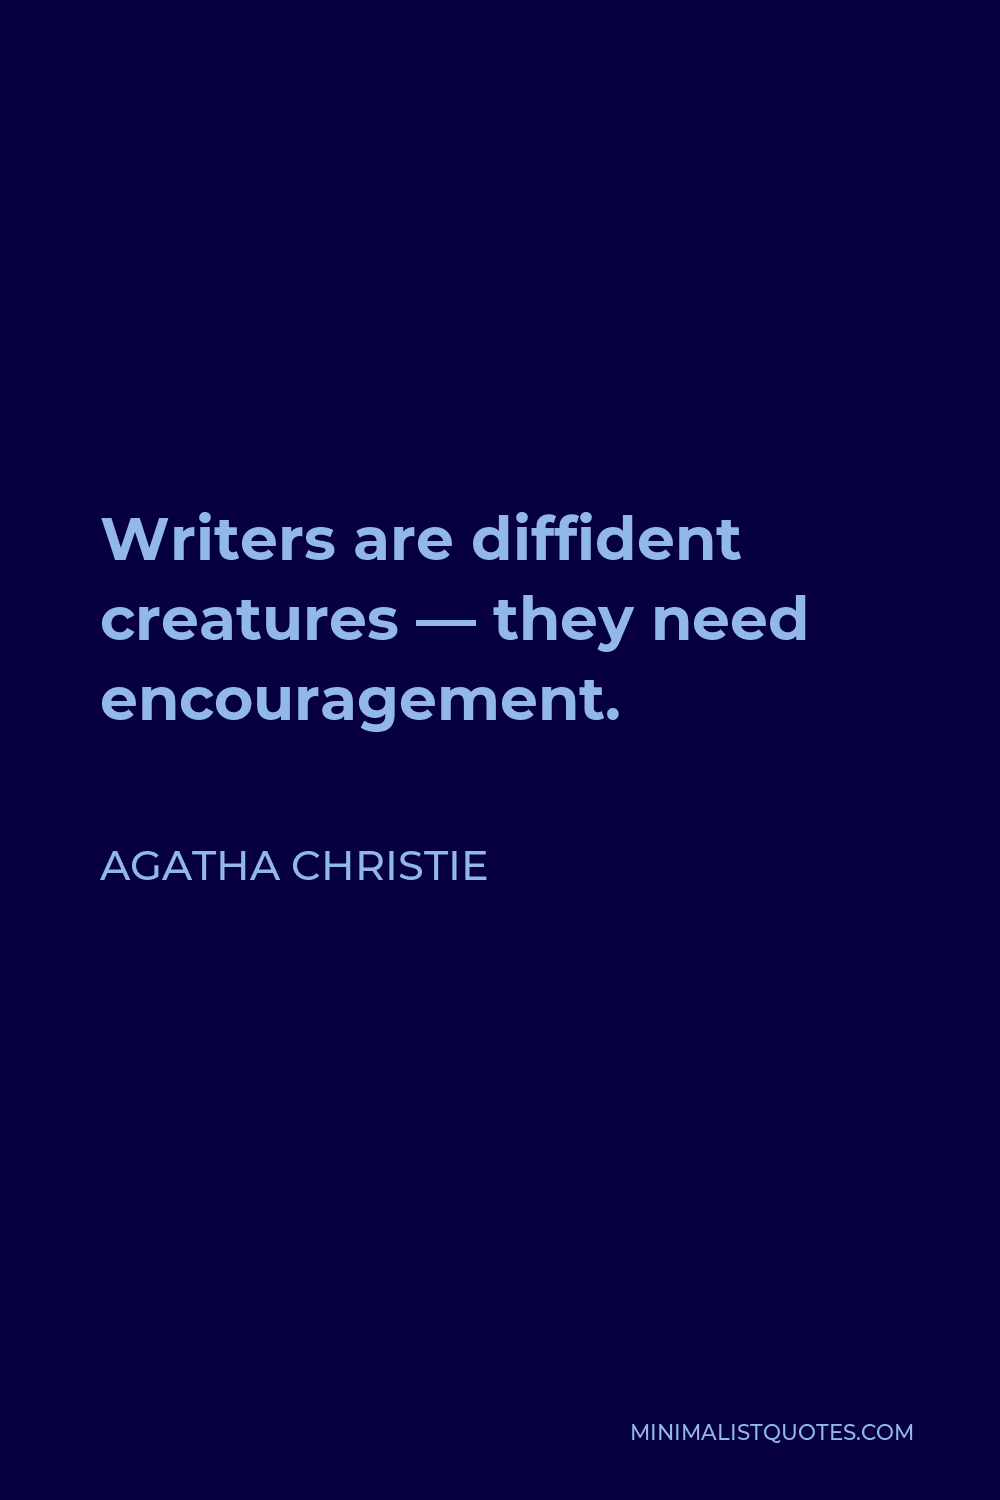 Agatha Christie Quote - Writers are diffident creatures — they need encouragement.